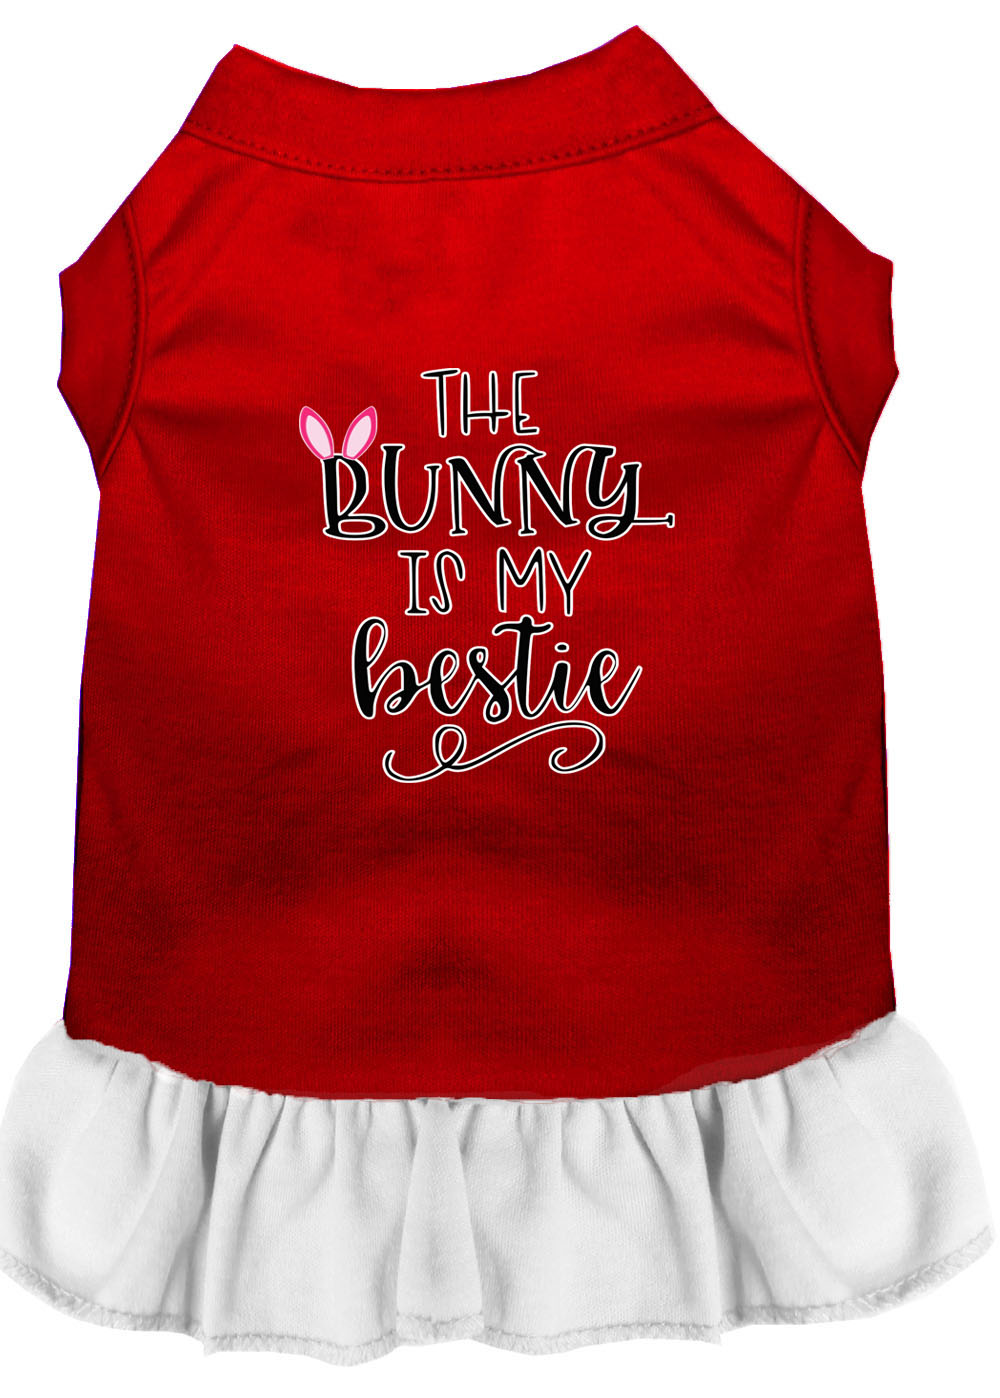 Bunny is my Bestie Screen Print Dog Dress Red with White Lg